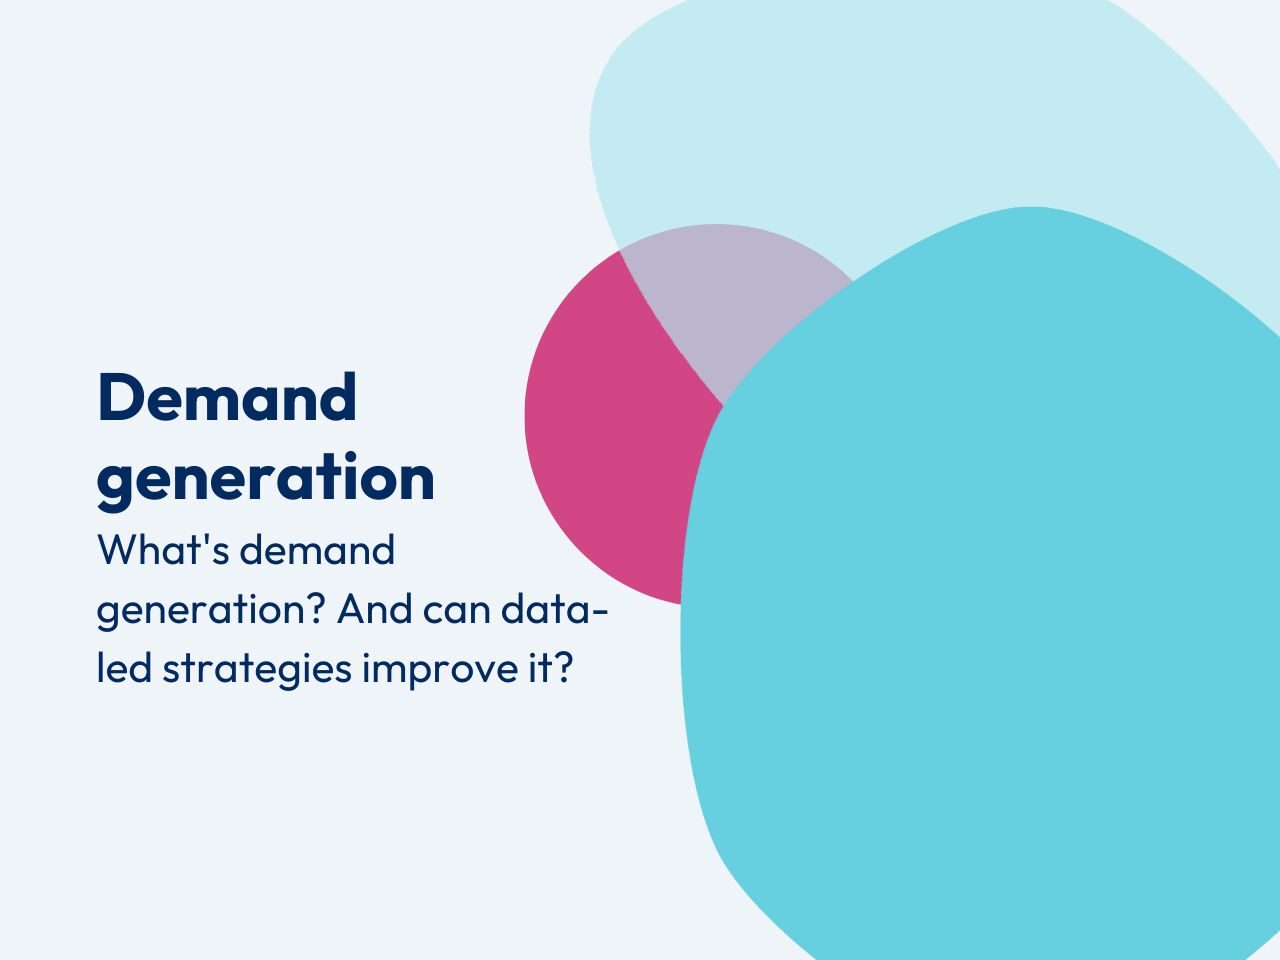 demand generation is best led by data